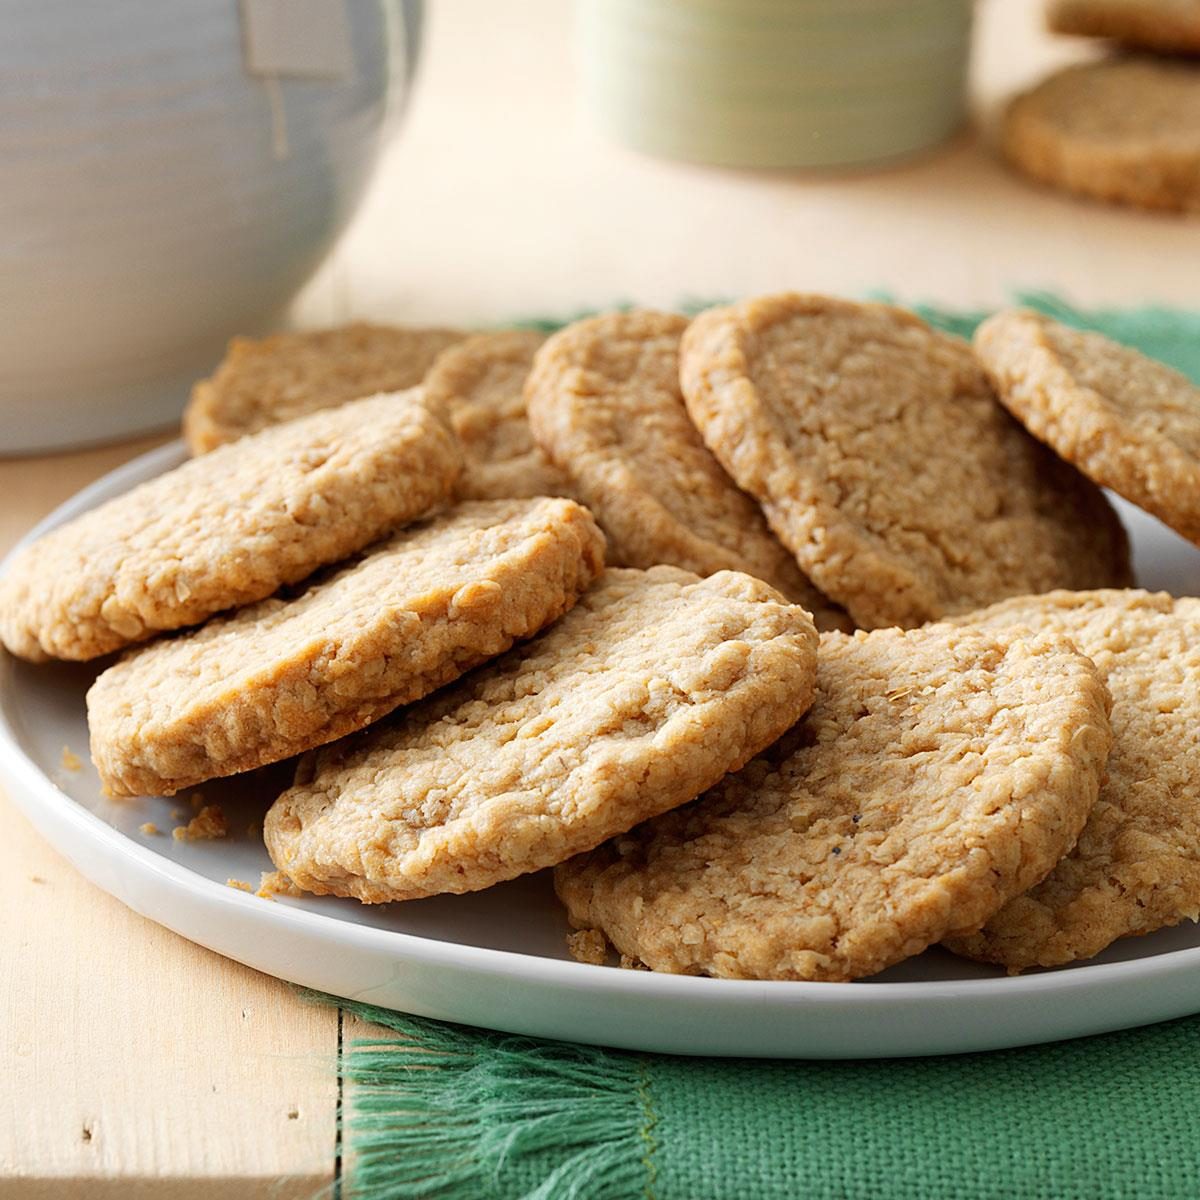 Rolled Oat Cookies Recipe: How to Make It